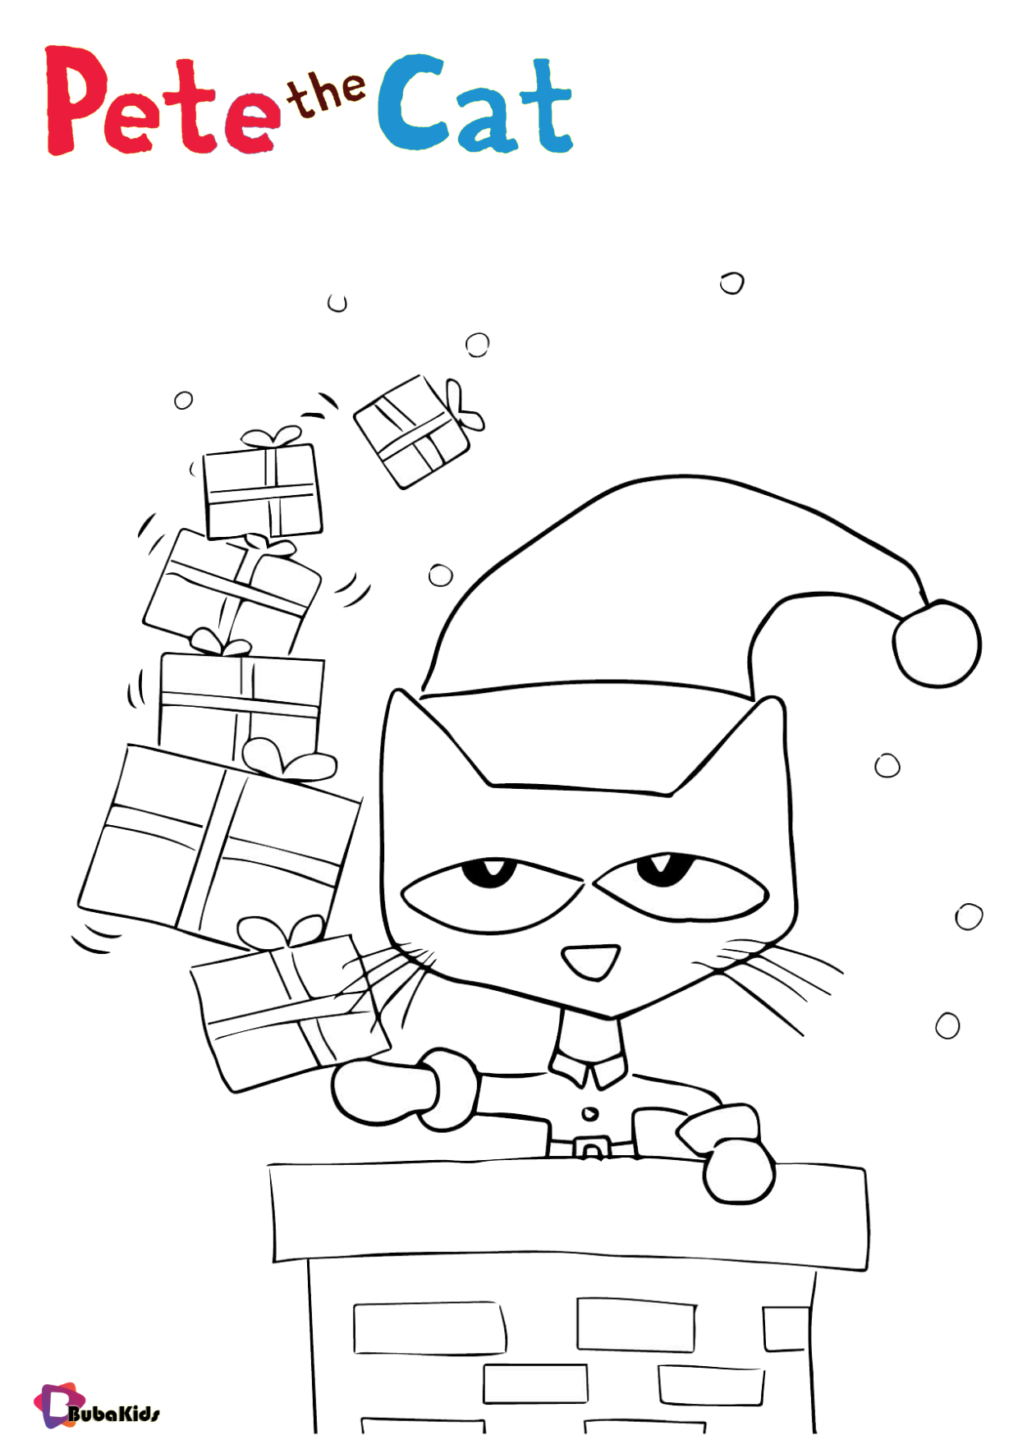 Pete the Cat Christmas coloring page